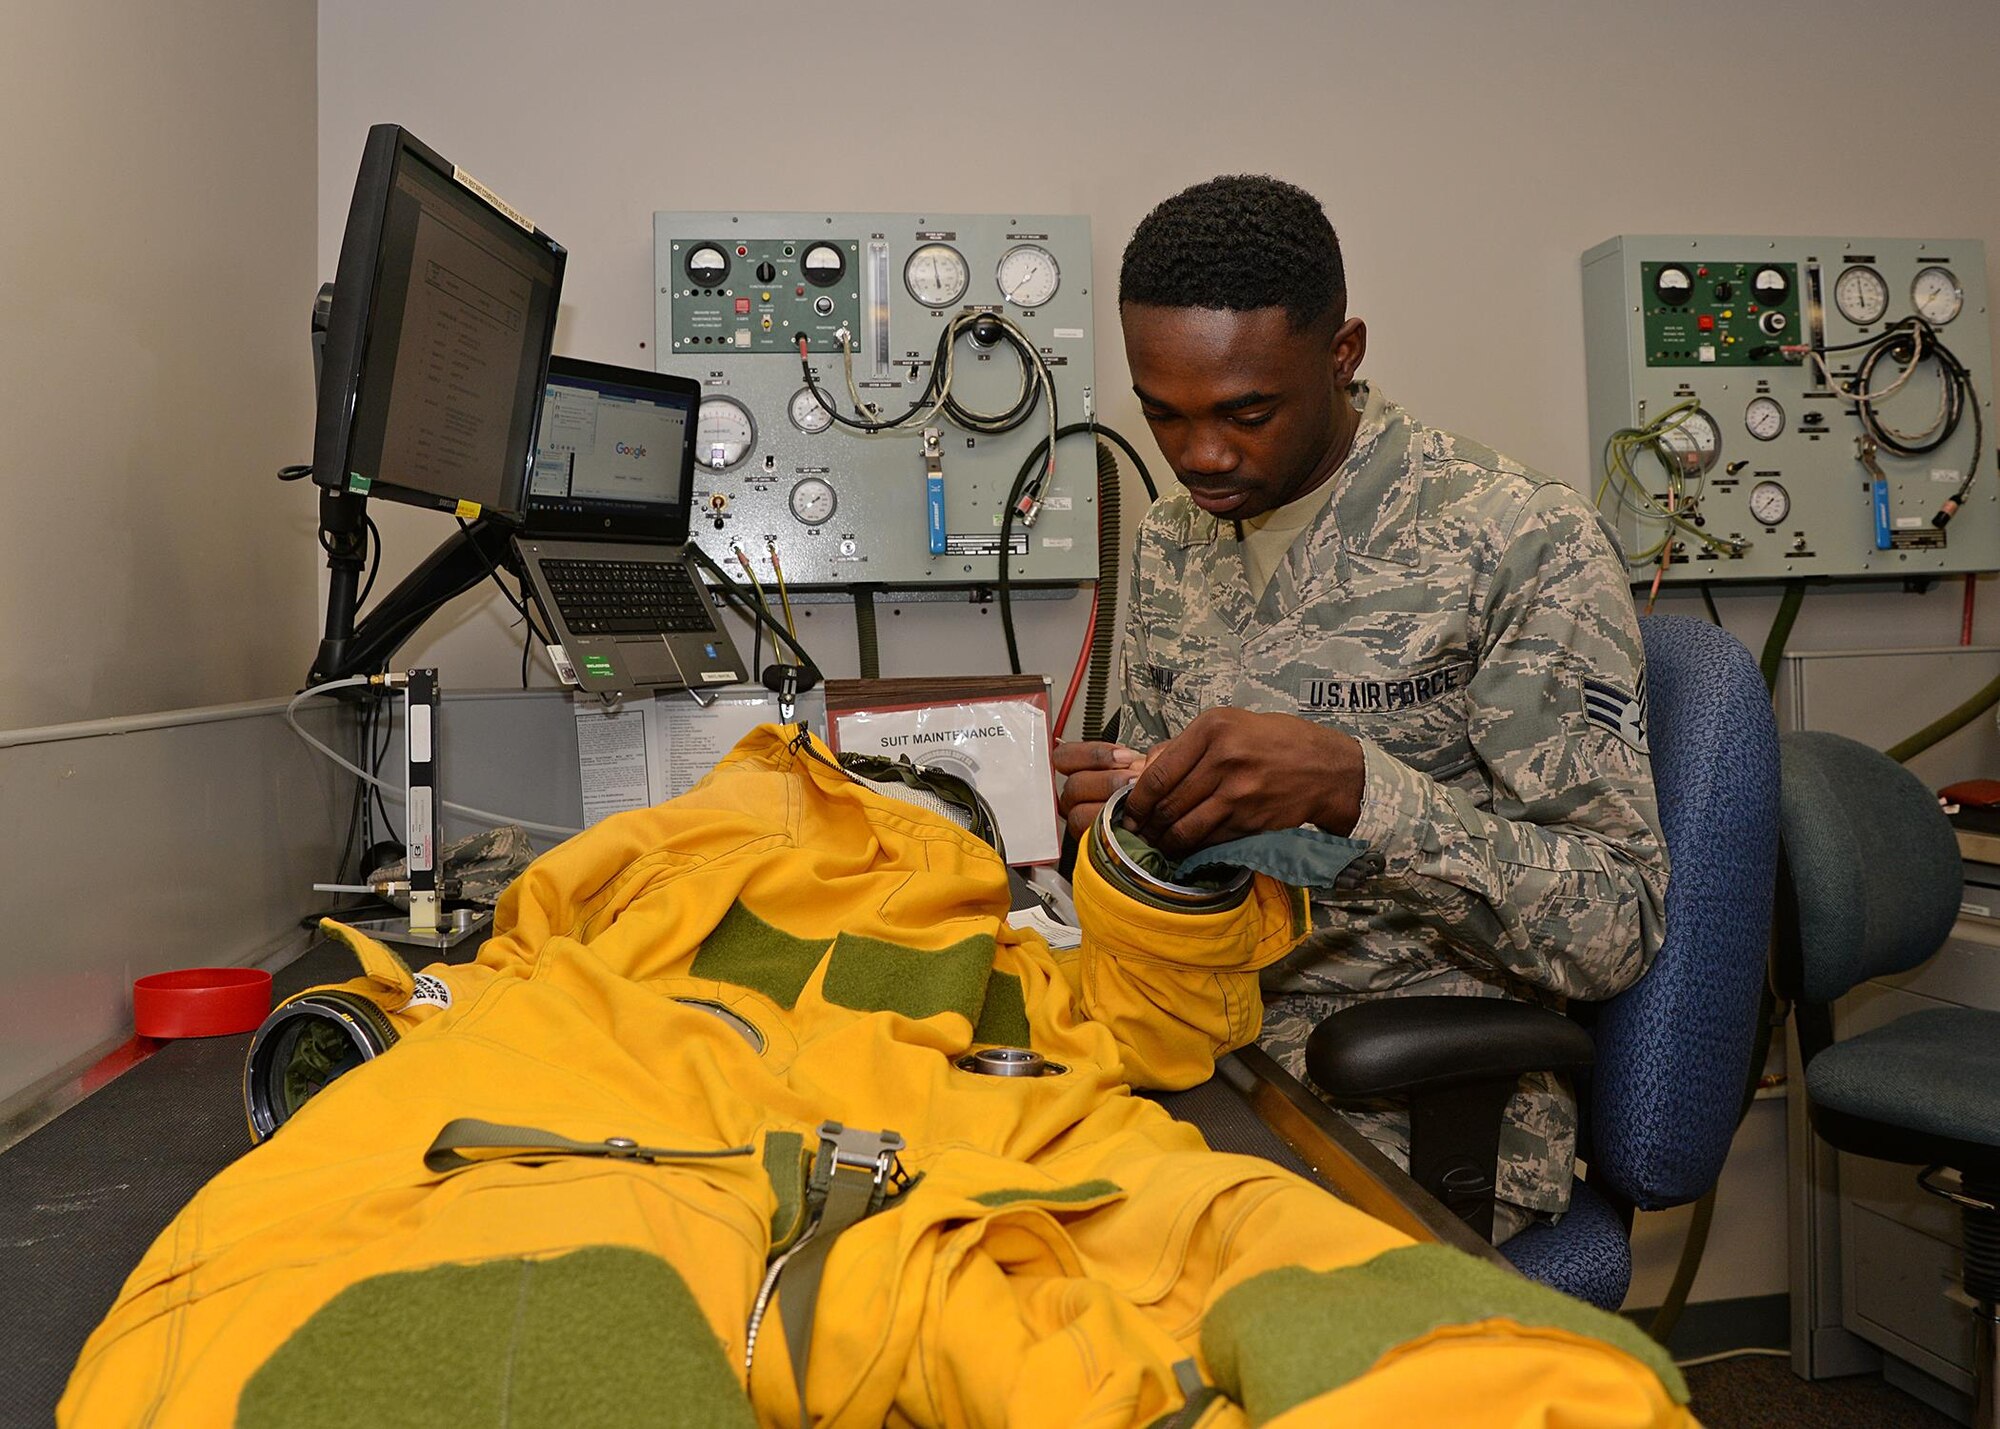 Senior Airman Simon Adeniji, 9th Physiological Support Squadron full pressure suit technician, performs a routine inspection on a full pressure suit Aug. 31, 2016, at Beale Air Force, California. Full pressure suits are worn by U-2 pilots to ensure their safety for flights that can go as high as 70,000 feet. (U.S. Air Force photo/Airman Tristan D. Viglianco)